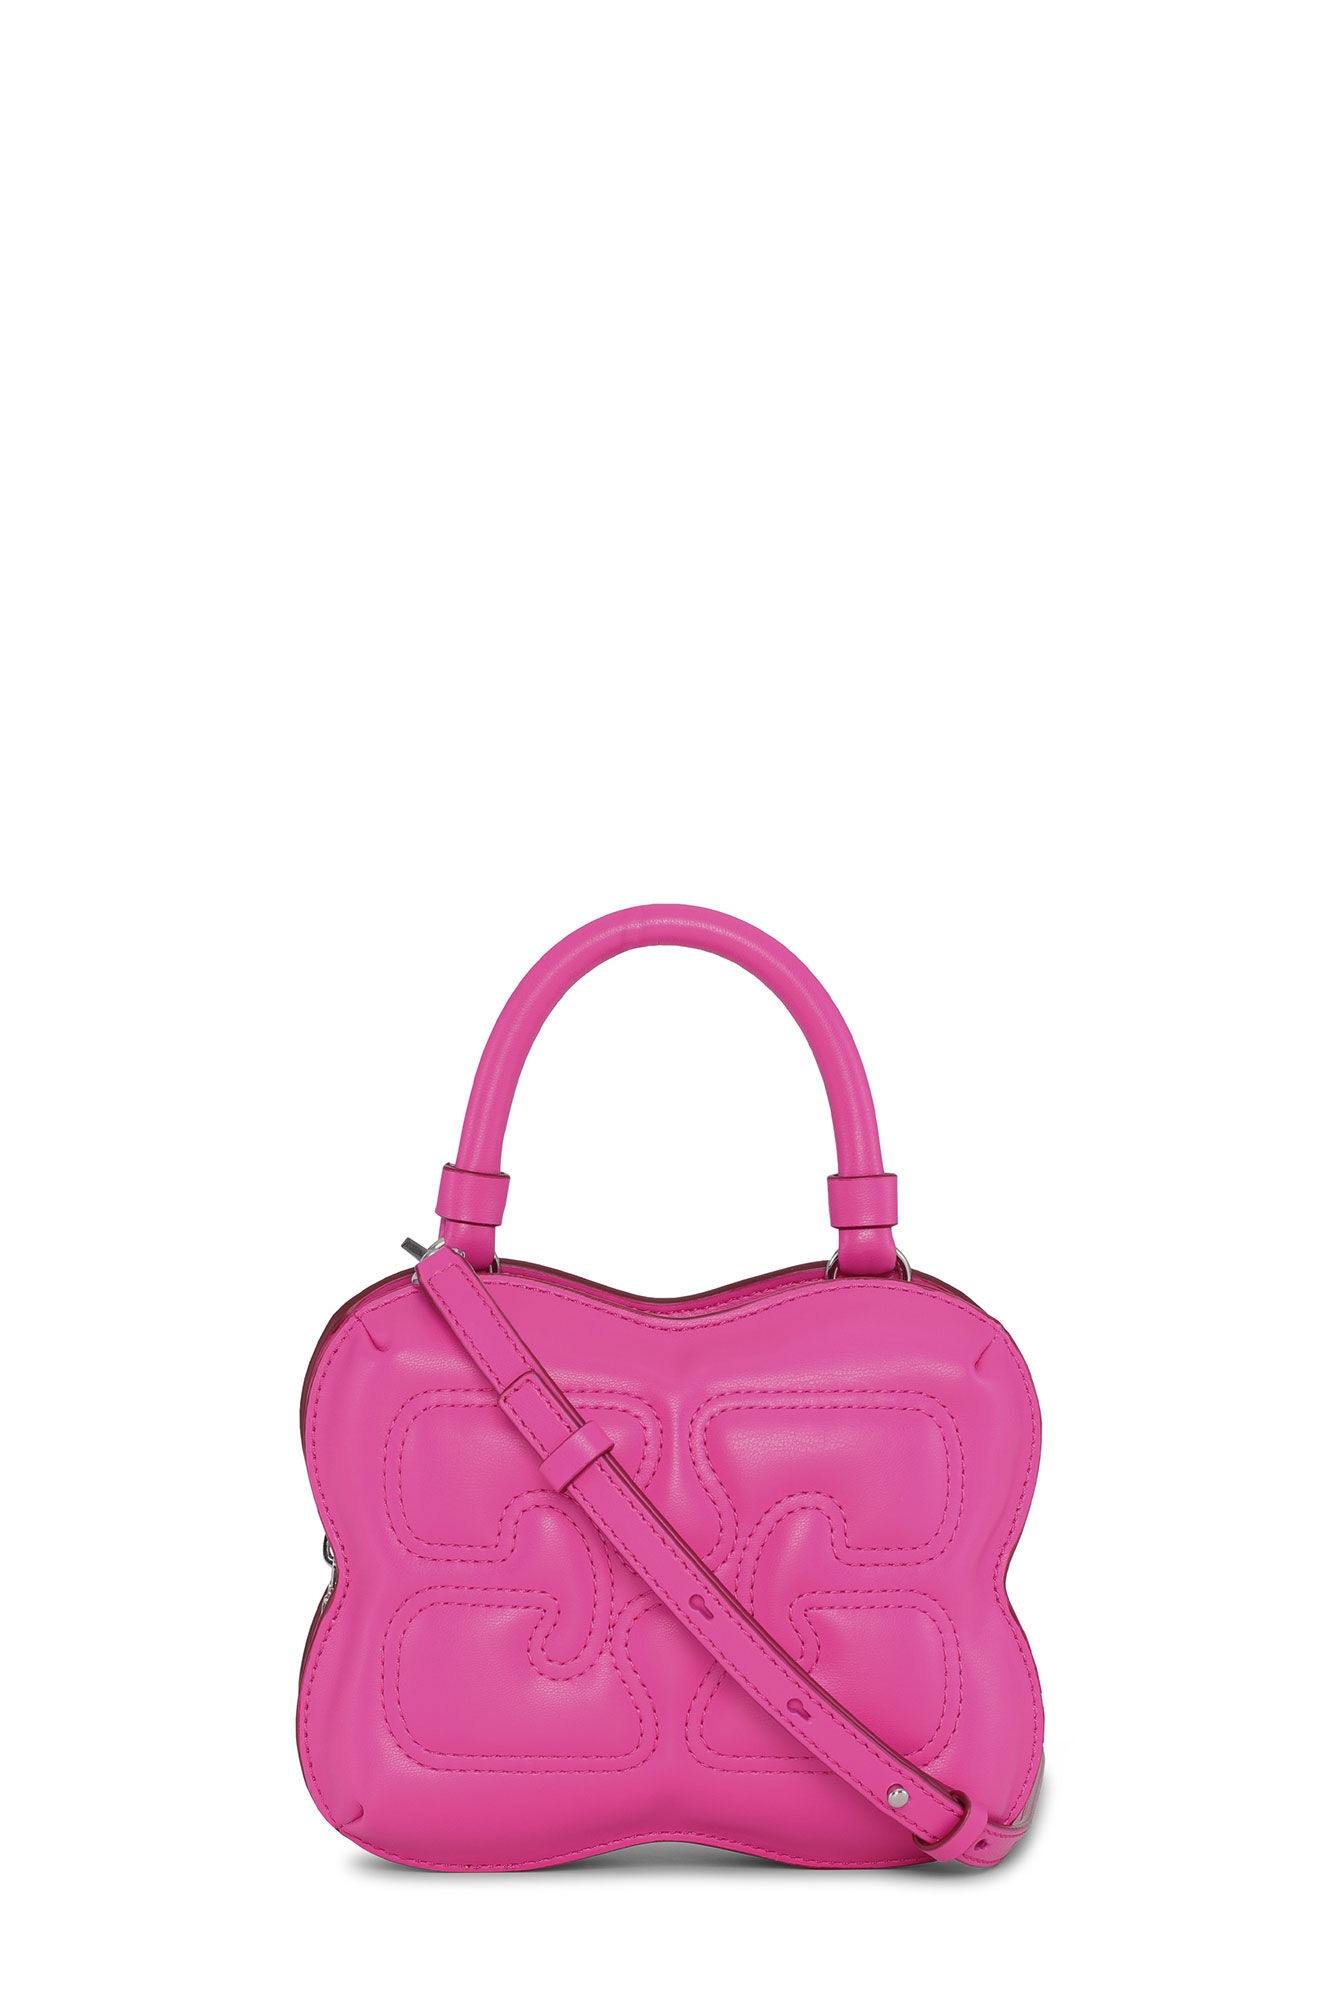 PINK SMALL BUTTERFLY CROSSBODY BAG - 1